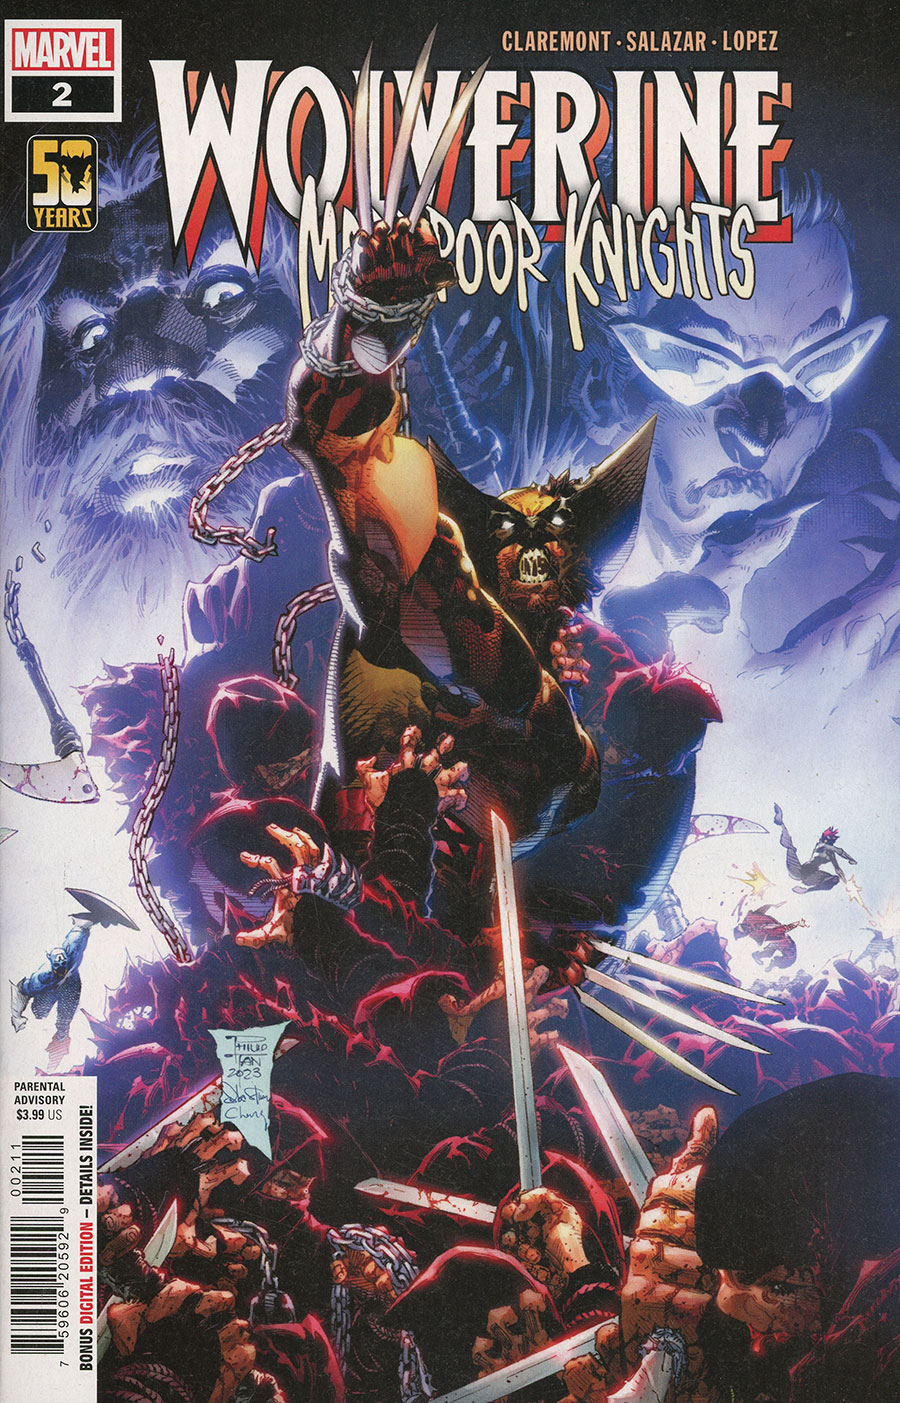 Wolverine Madripoor Knights #2 Cover A Regular Philip Tan Cover